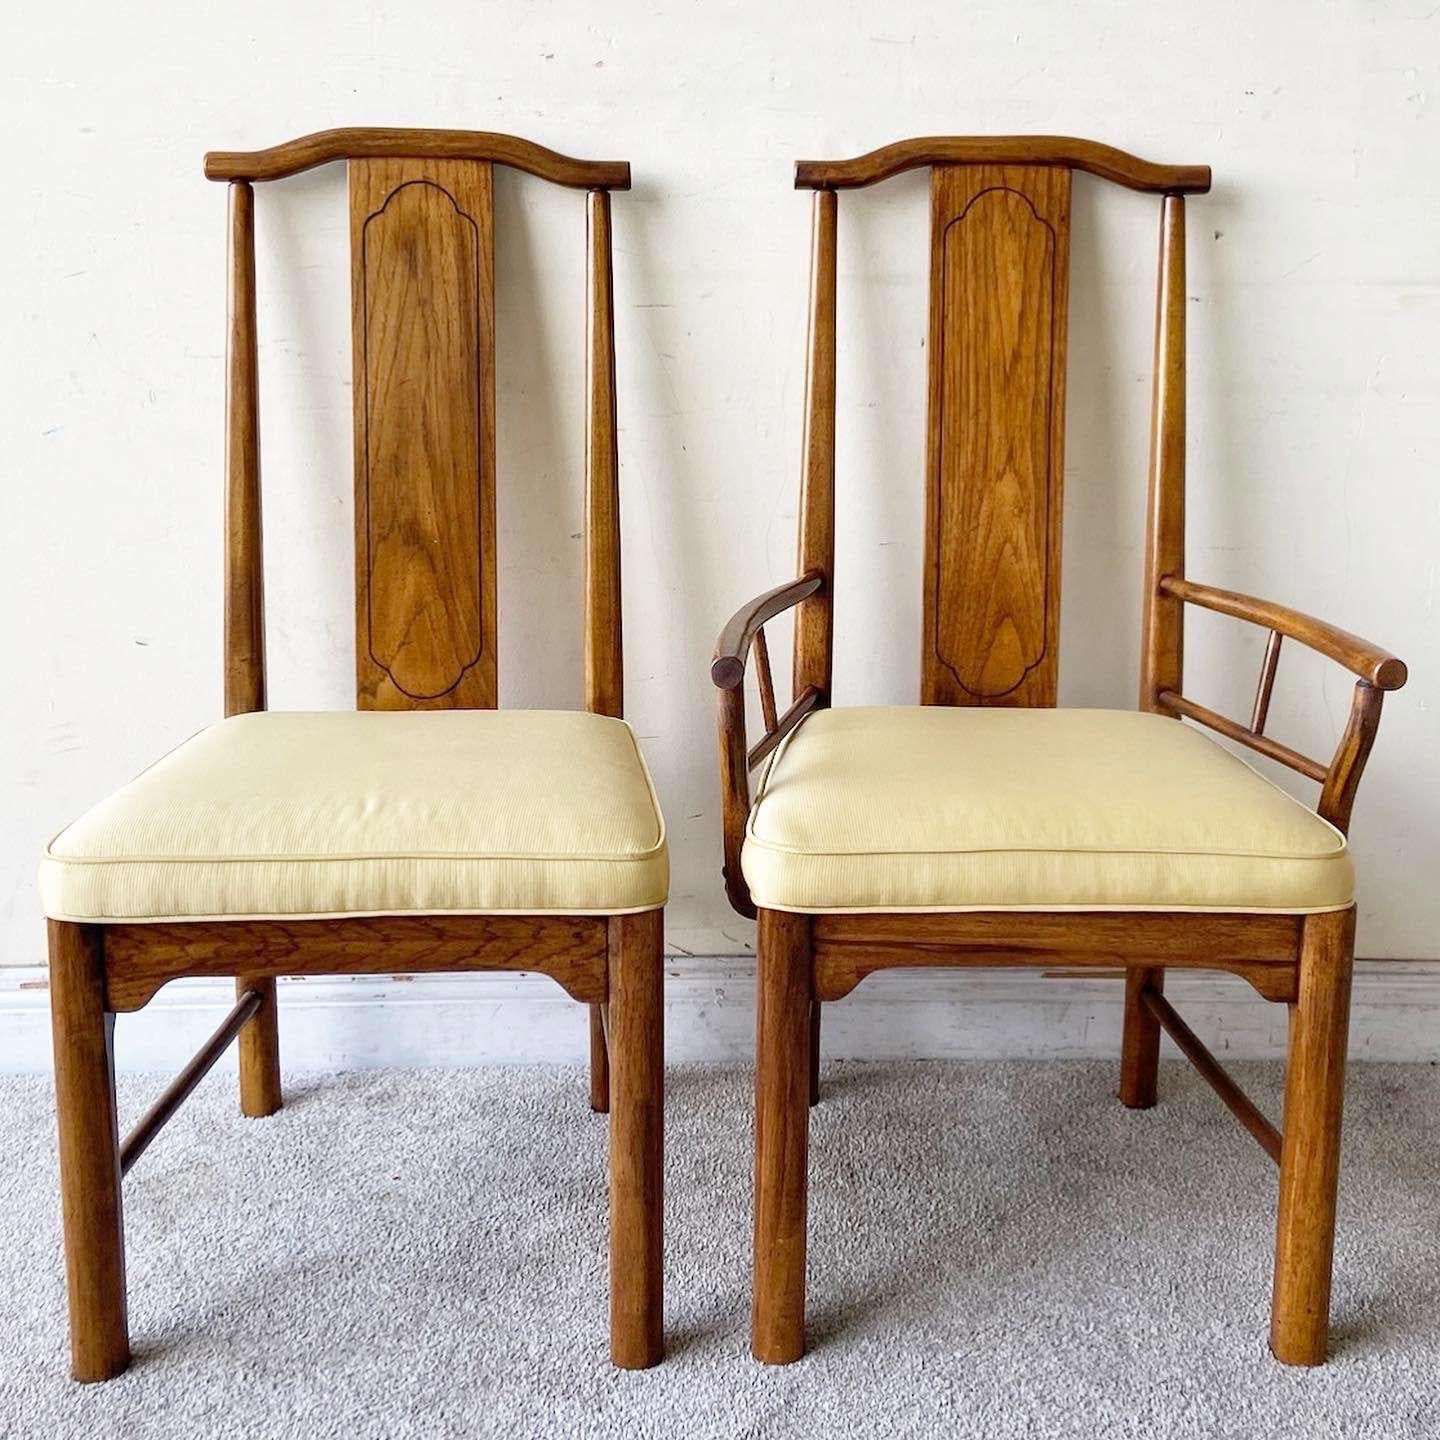 Vintage Chinoiserie Wooden Dining Chairs - Set of 6 For Sale 3